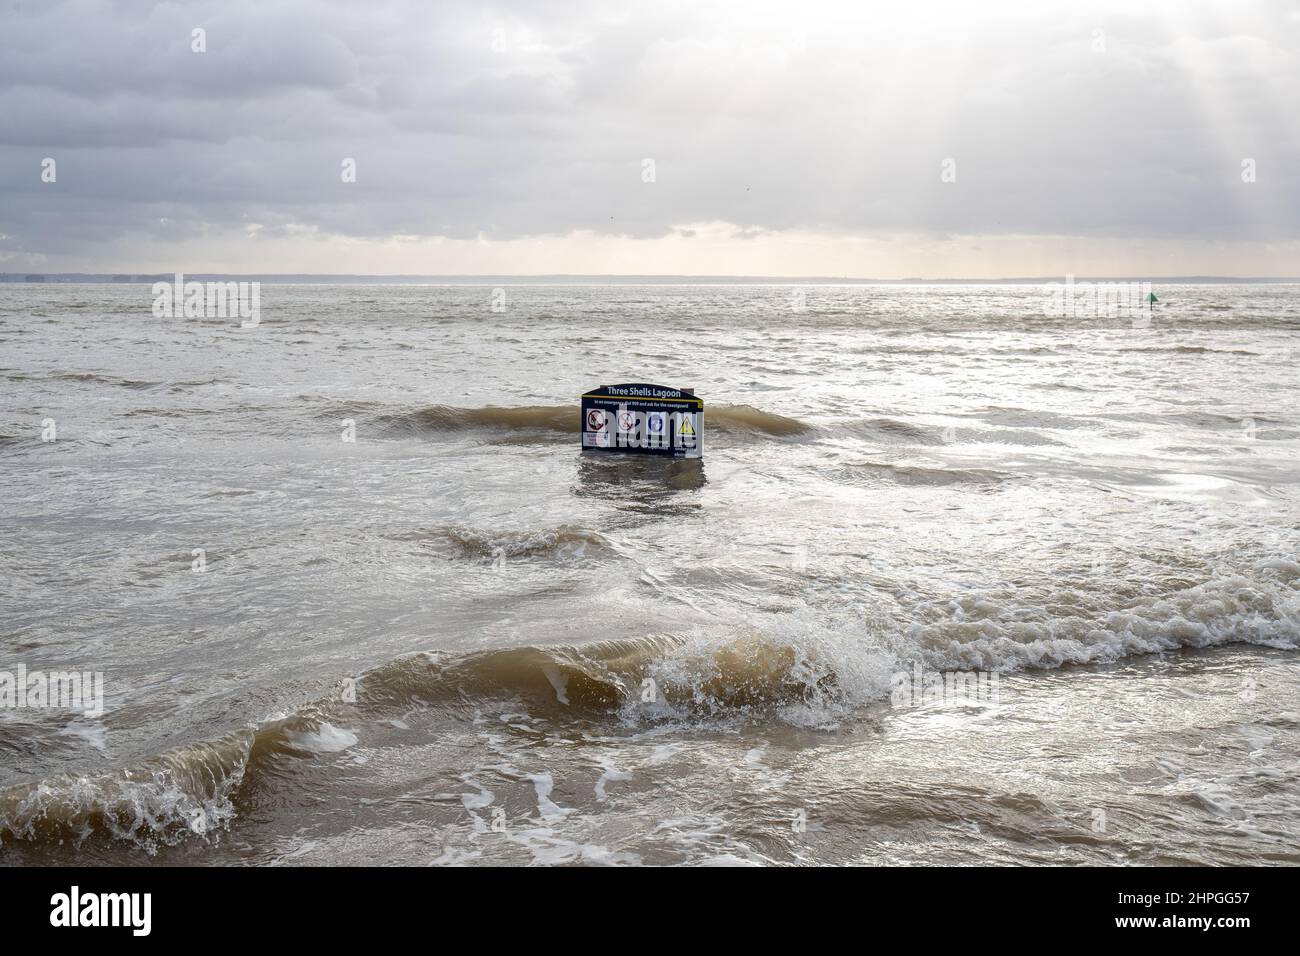 SOUTHEND-ON-SEA, ESSEX, FEBRUARY 21 2022, Southend seafront floods as Storm Franklin hits the UK, The third storm to hit the UK this week. Stock Photo